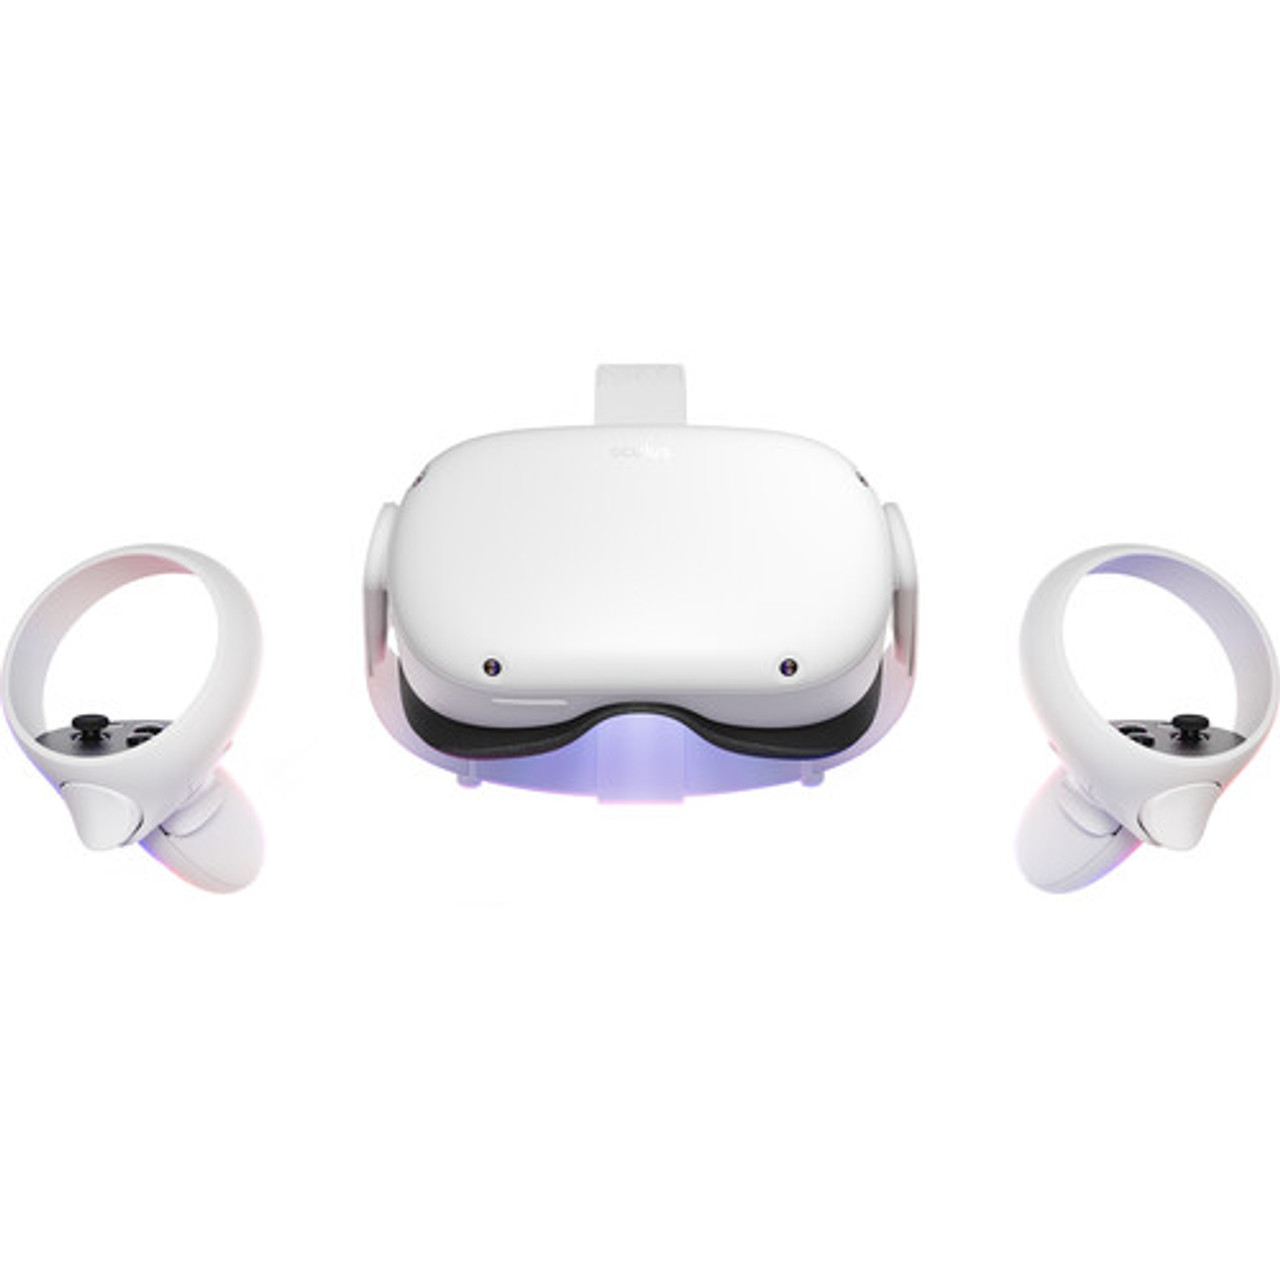 Rent to Own Meta Oculus Quest 2 AIO VR Headset - 128GB at Aaron's today!